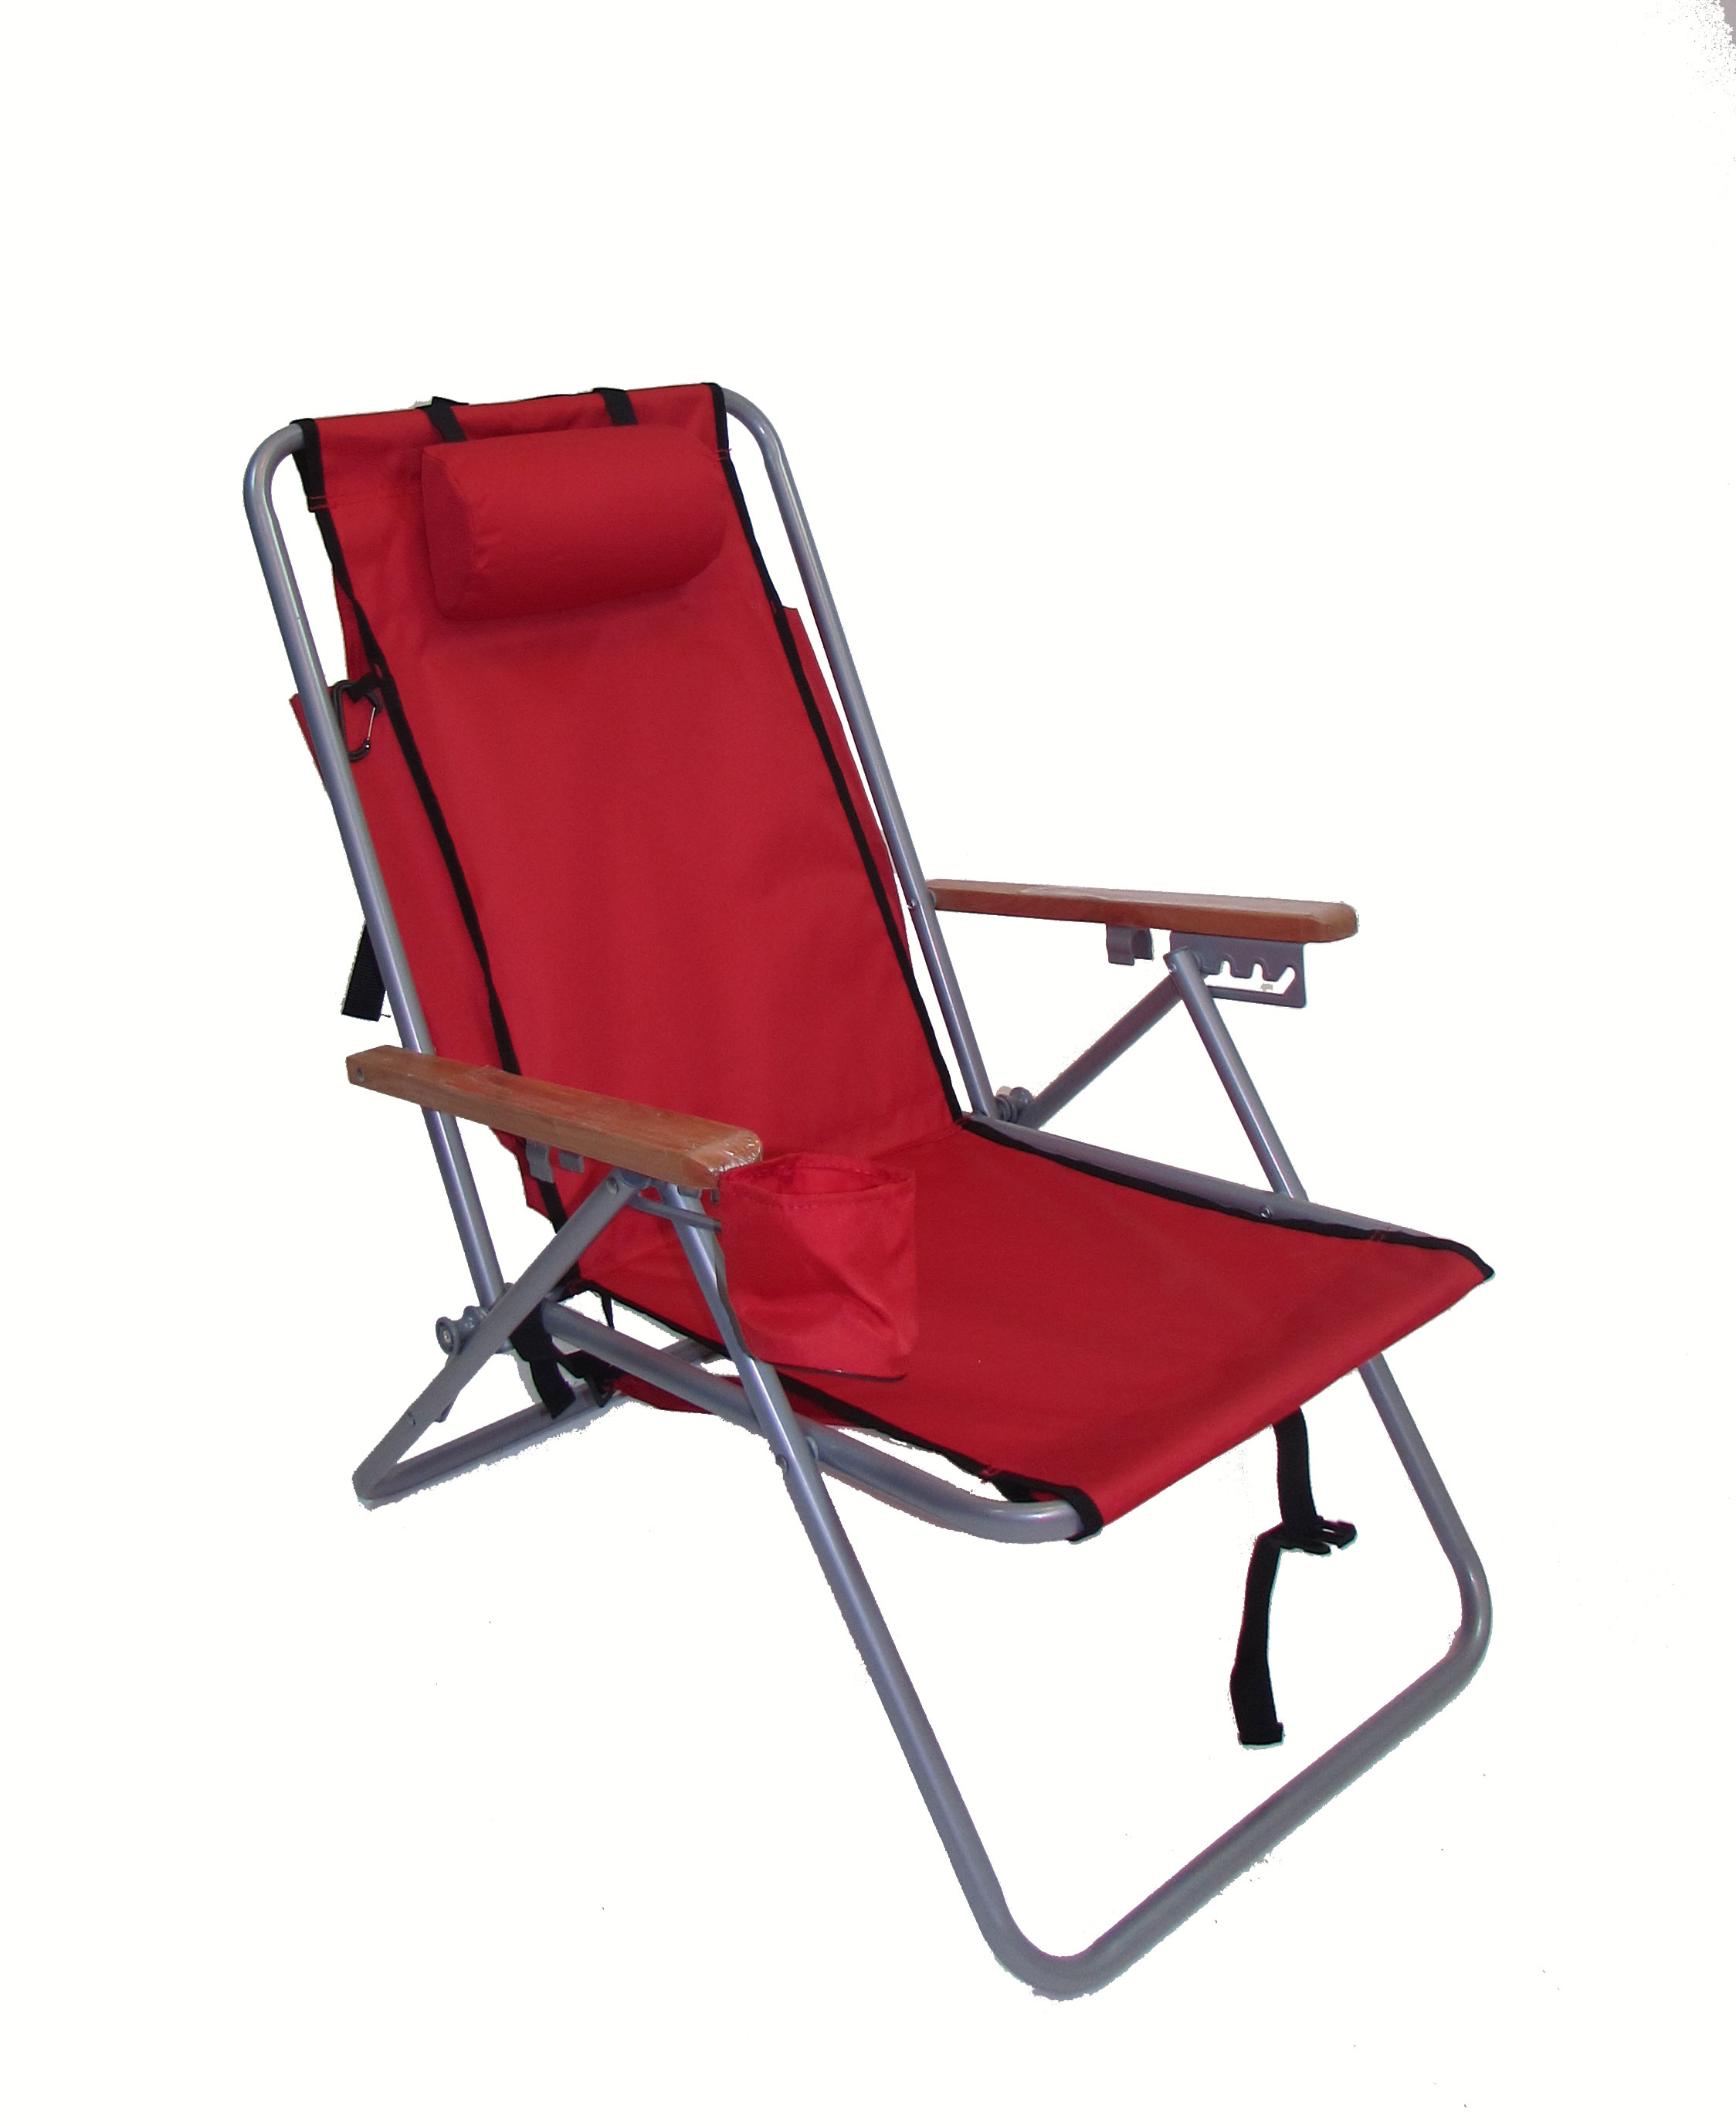 Minimalist High Weight Beach Chair for Large Space